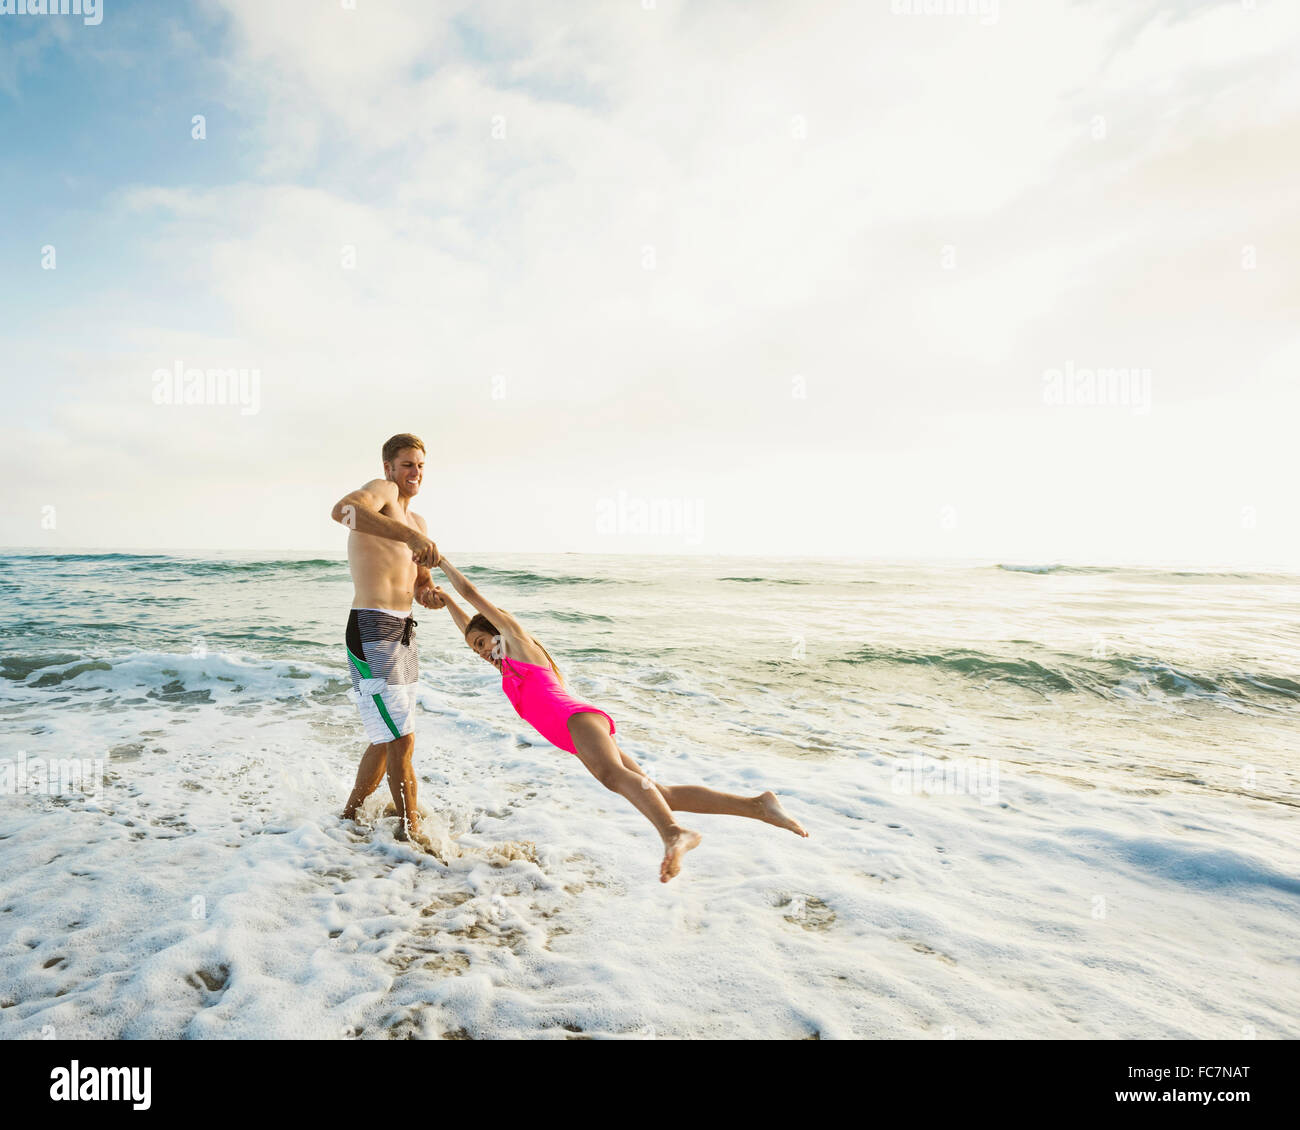 Caucasian father and daughter playing in waves on beach Stock Photo